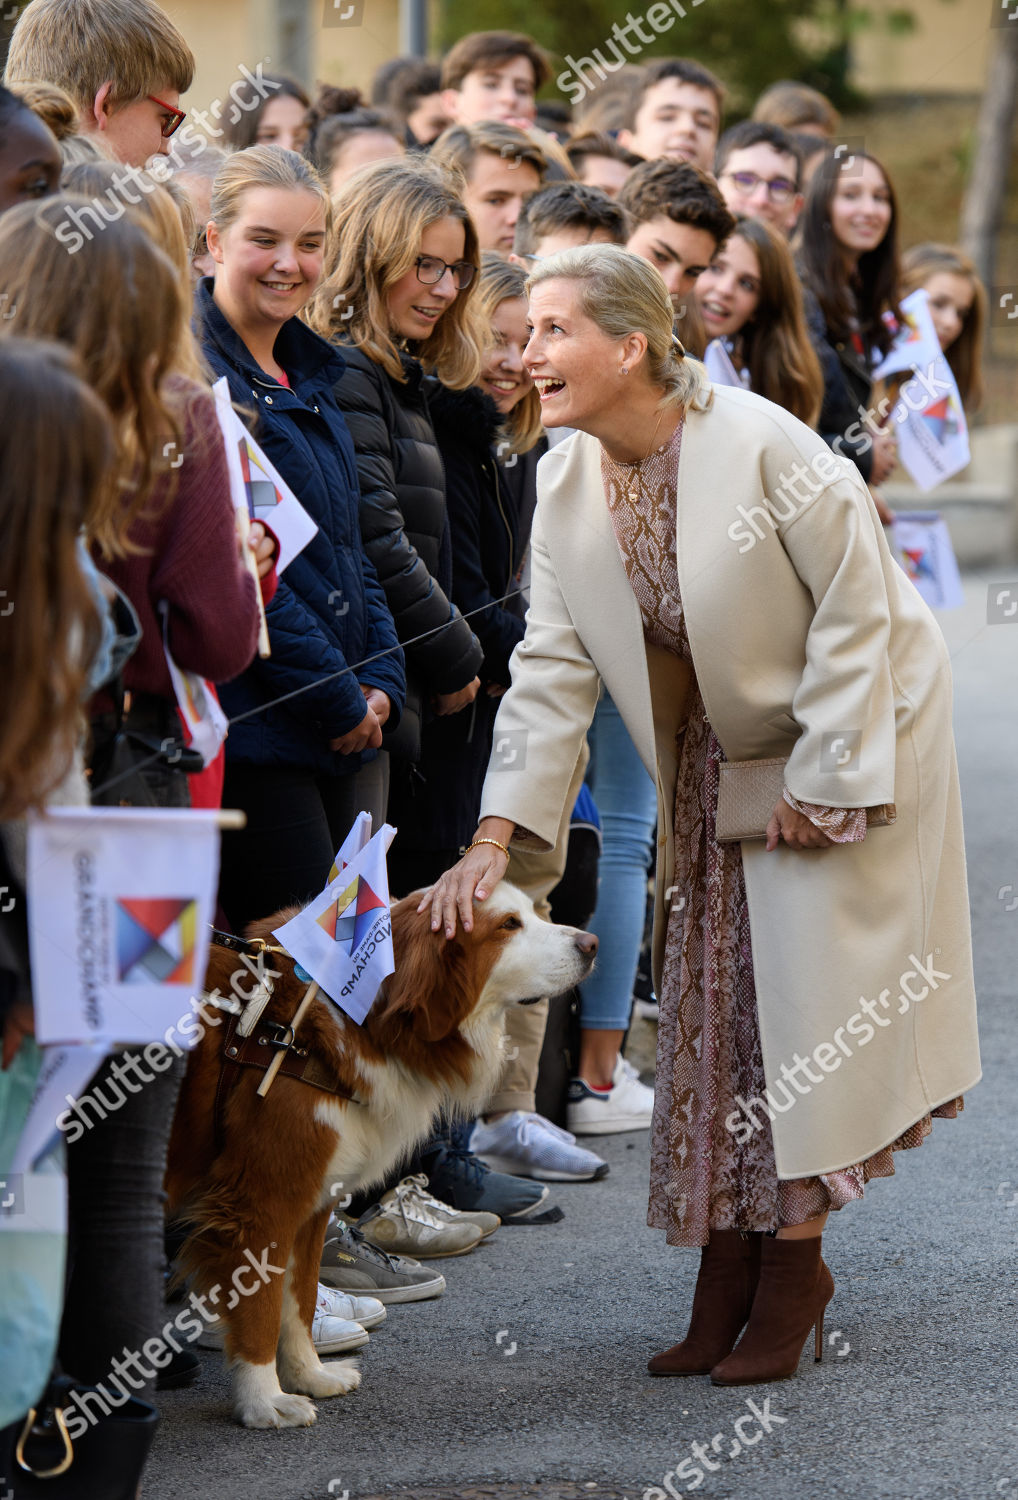 prince-edward-and-sophie-countess-of-wessex-visit-to-france-shutterstock-editorial-9907868aj.jpg